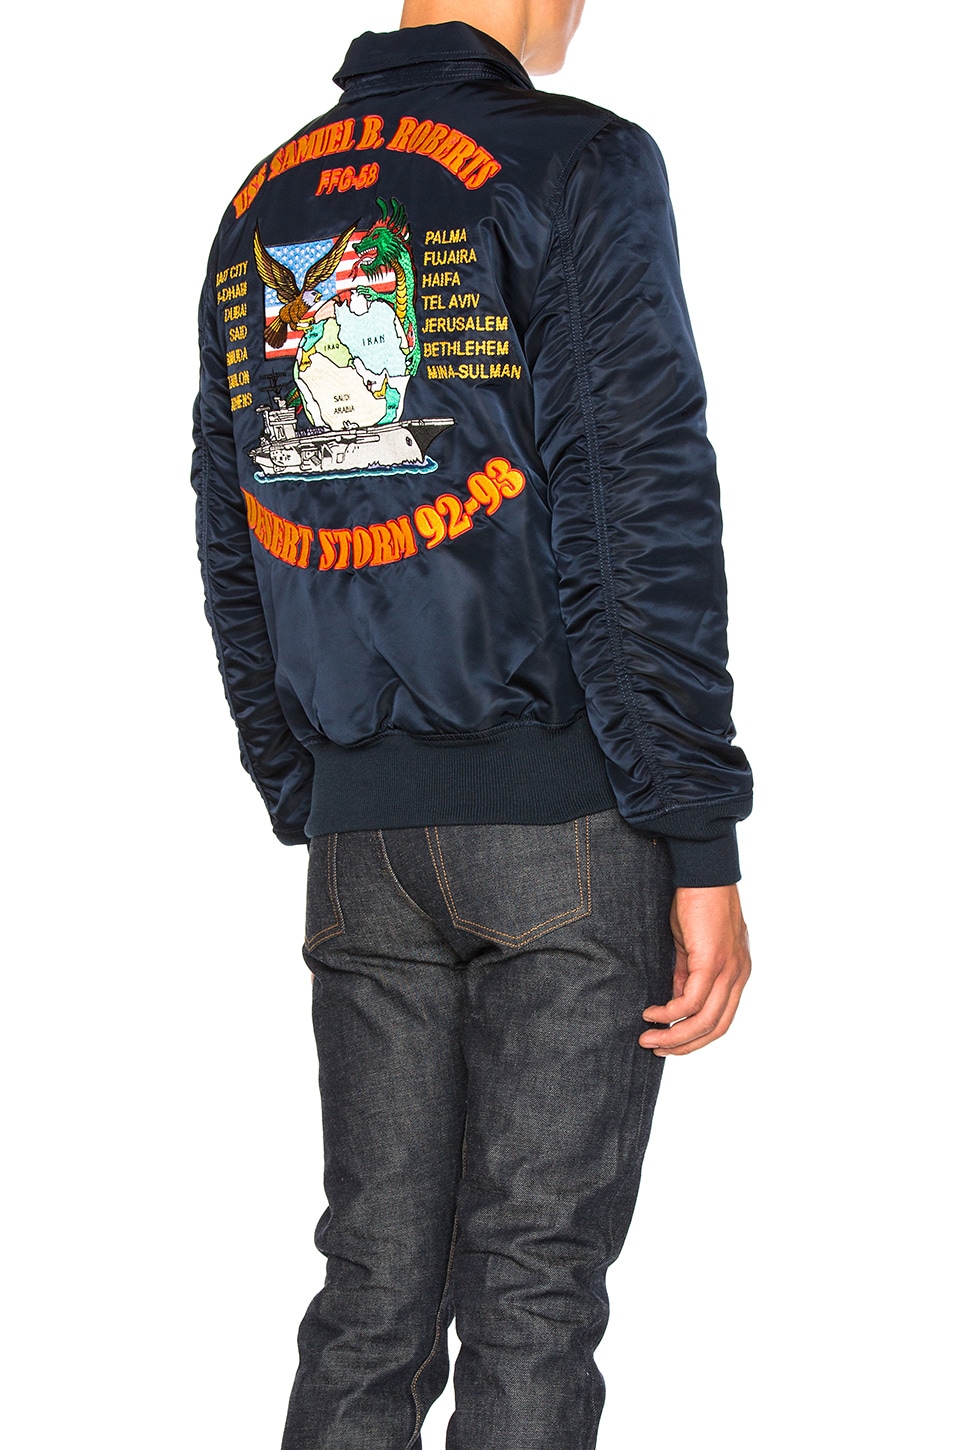 ALPHA INDUSTRIES CWU 45 P STORM CRUISE JACKET IN BLUE., REPLICA BLUE ...